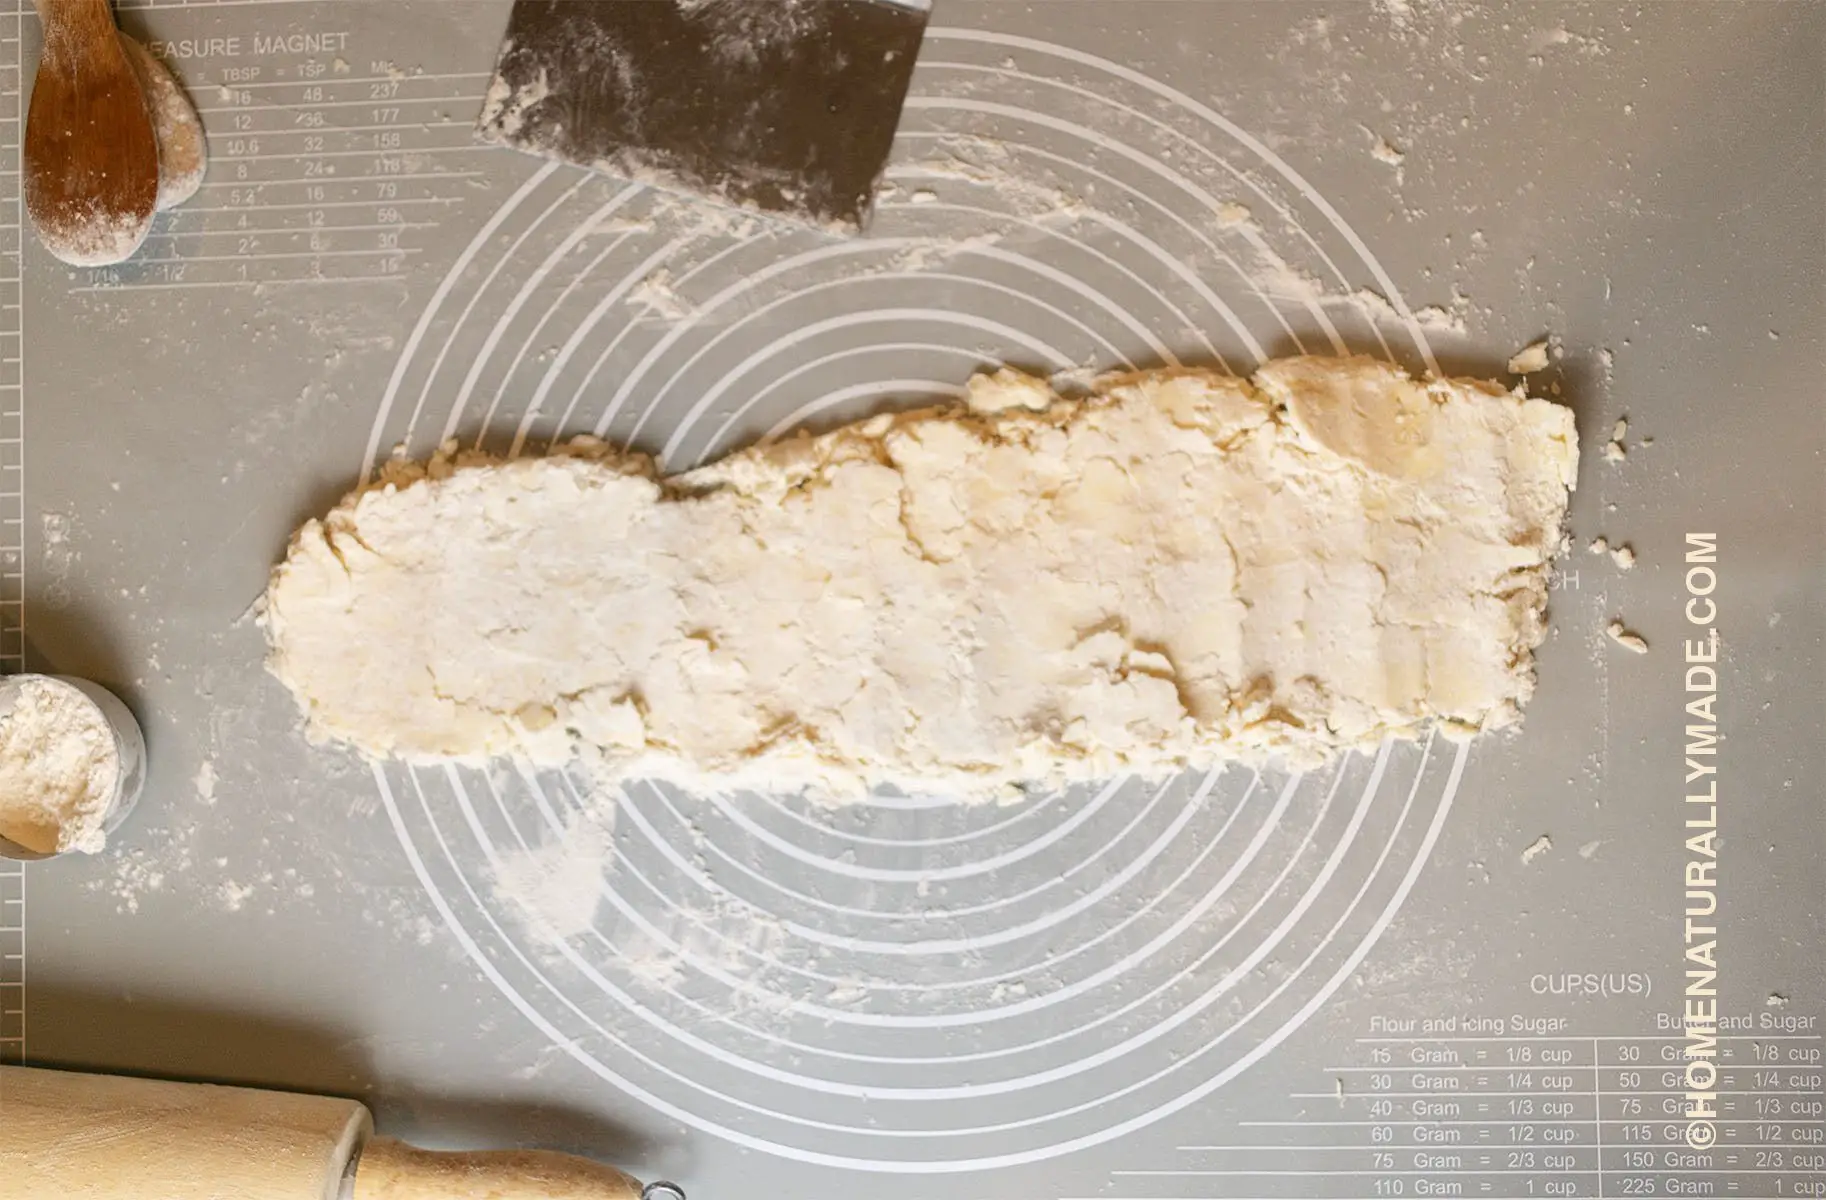 Roll out the shortcrust pastry dough into a long rectangle